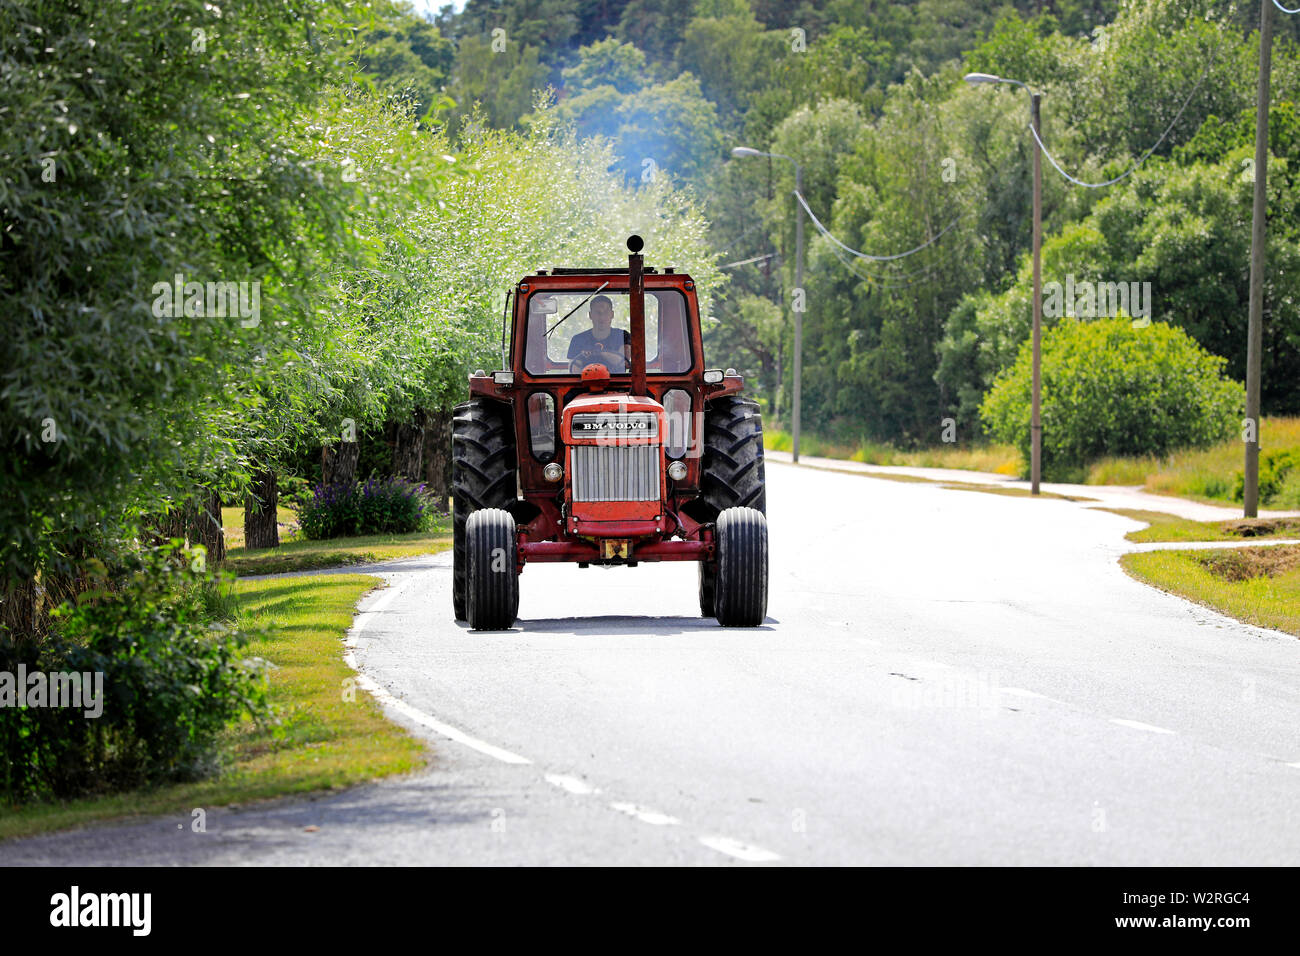 Kimito, Finland. July 6, 2019. Volvo BM tractor on Kimito Tractorkavalkad, Tractor Cavalcade, annual vintage tractor show and parade through the town. Stock Photo